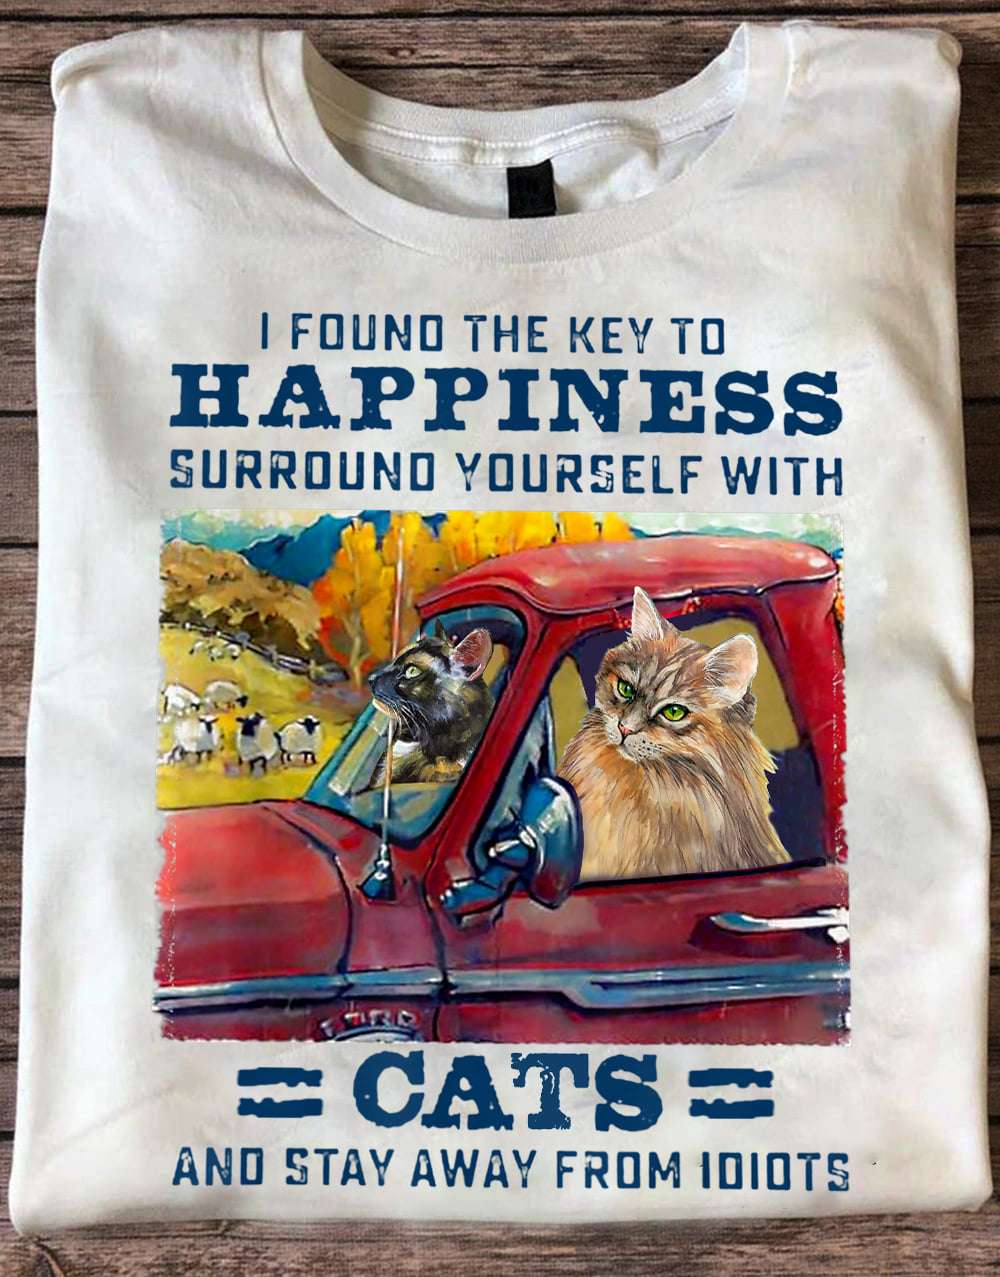 I found the key to happiness surround yourself with cats and stay away from idiots - Cat on the truck